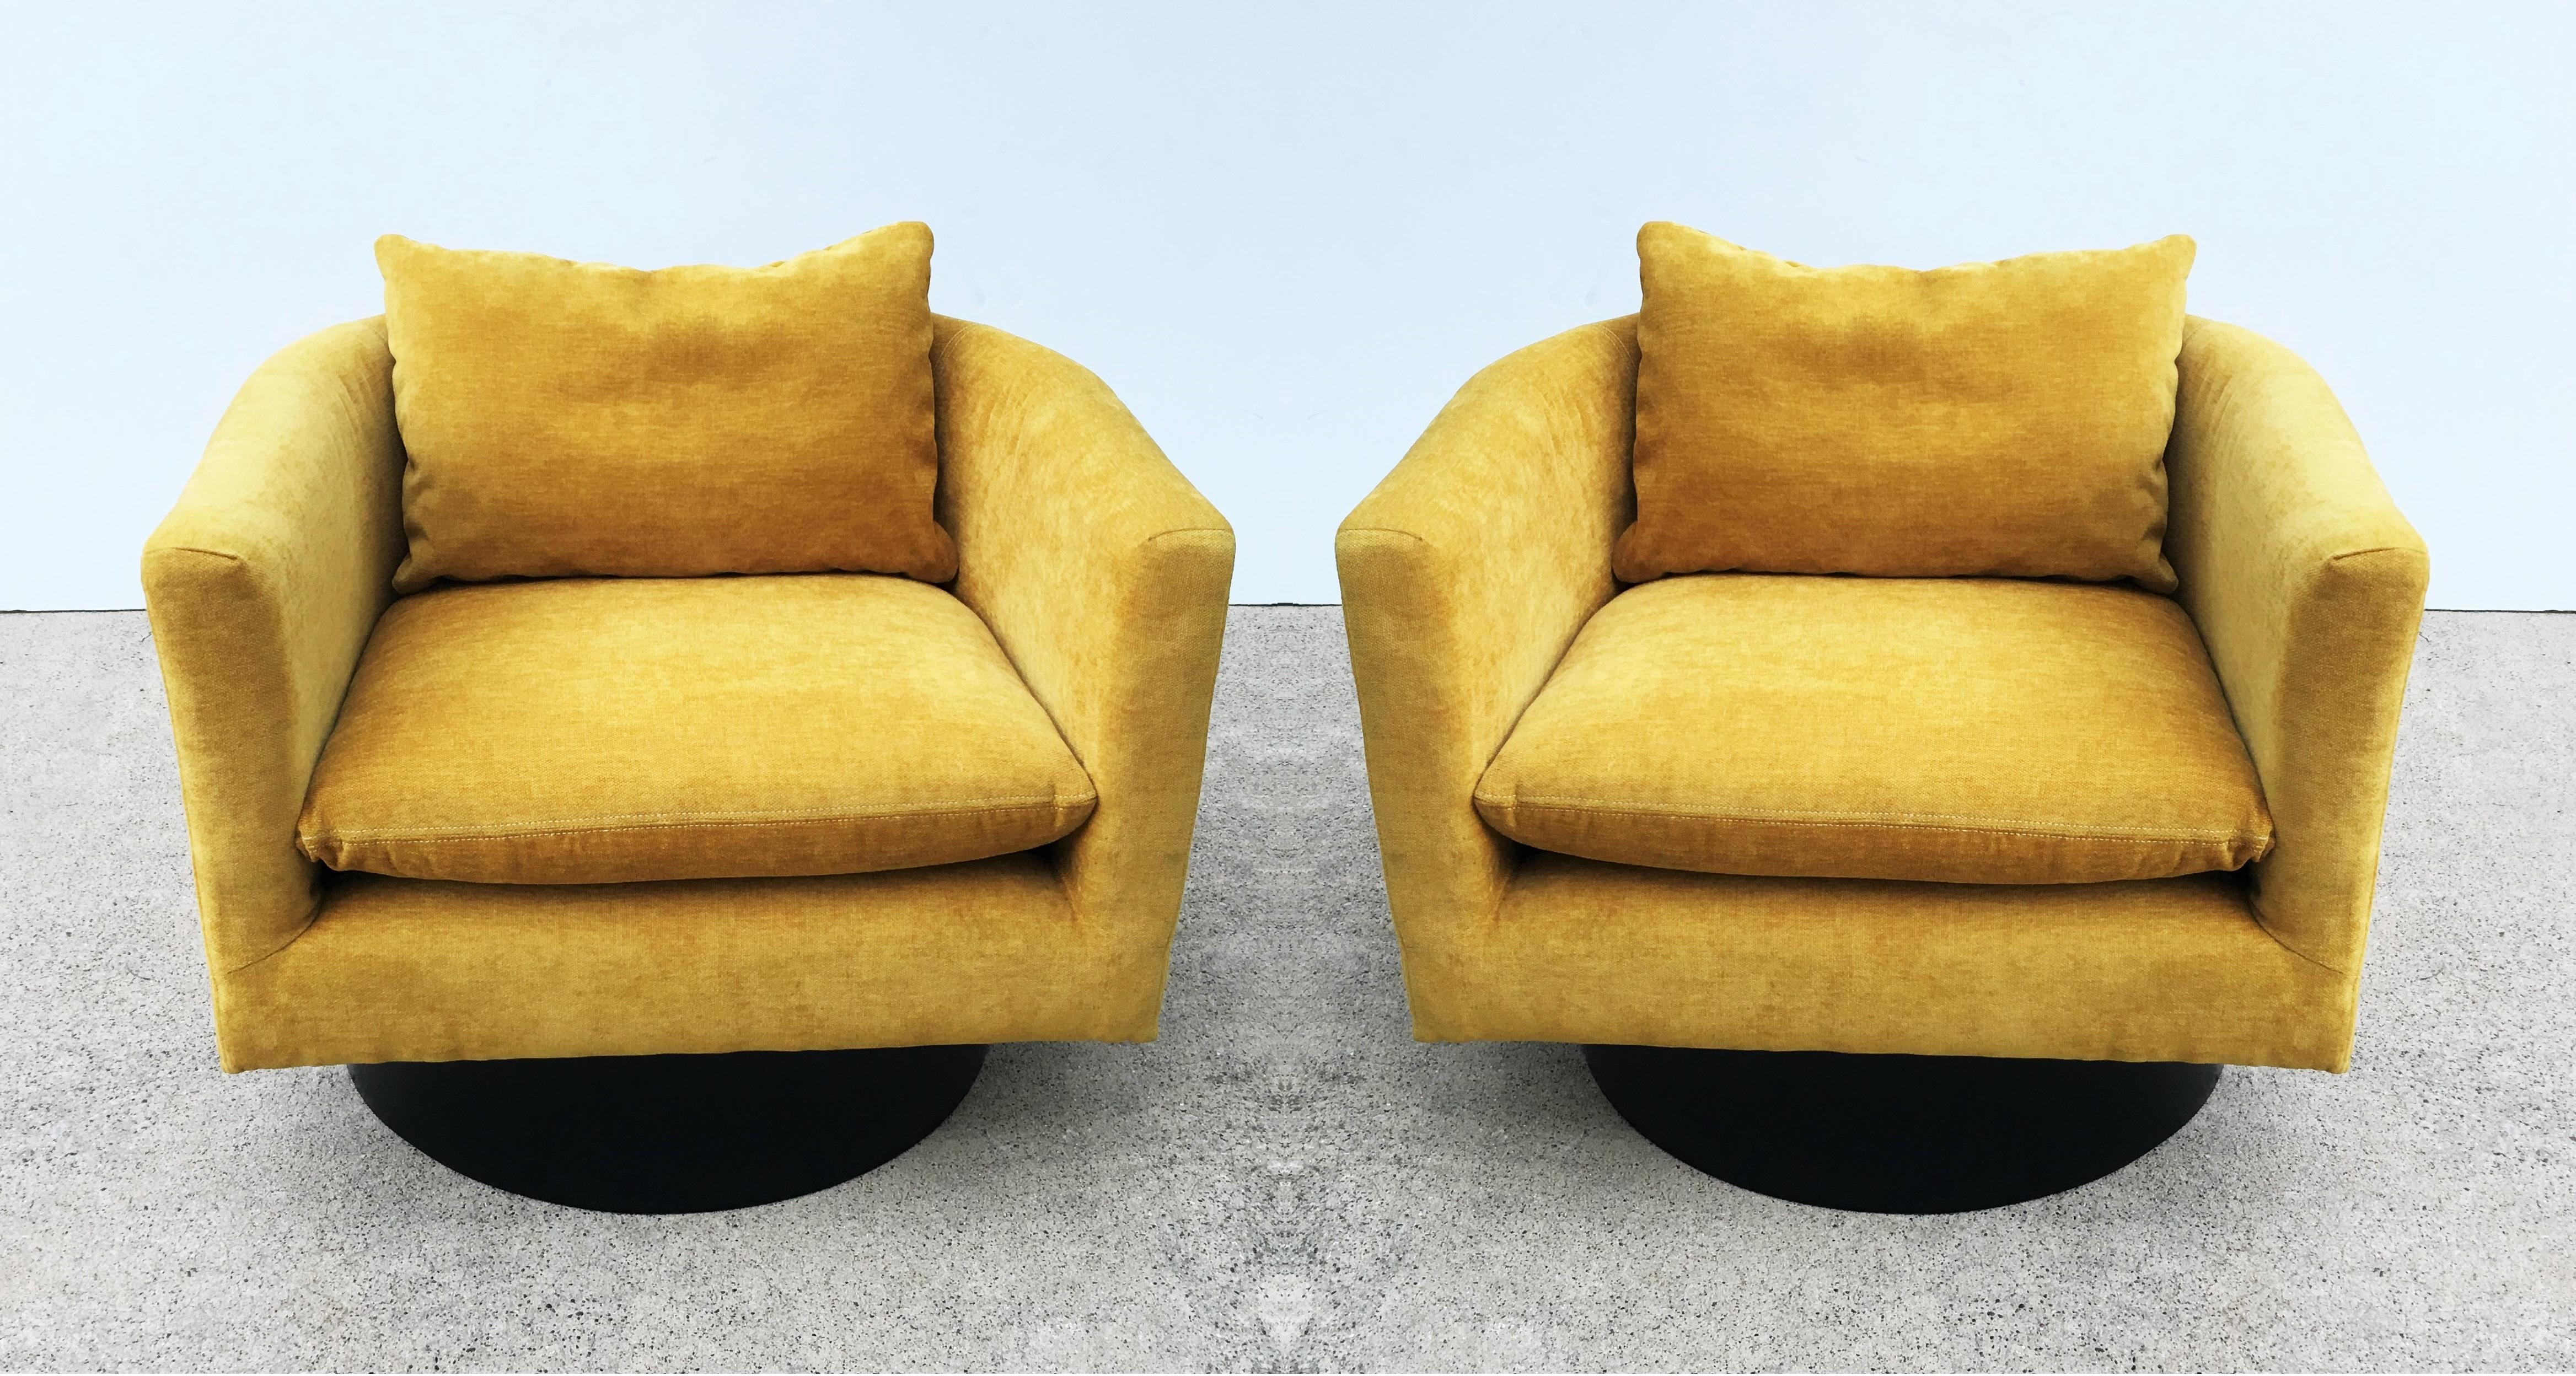 Very unusual pair of swivel chairs on high ebonized bases, designed by Milo Baughman for Thayer Coggin. Newly upholstered in yellow fabric.